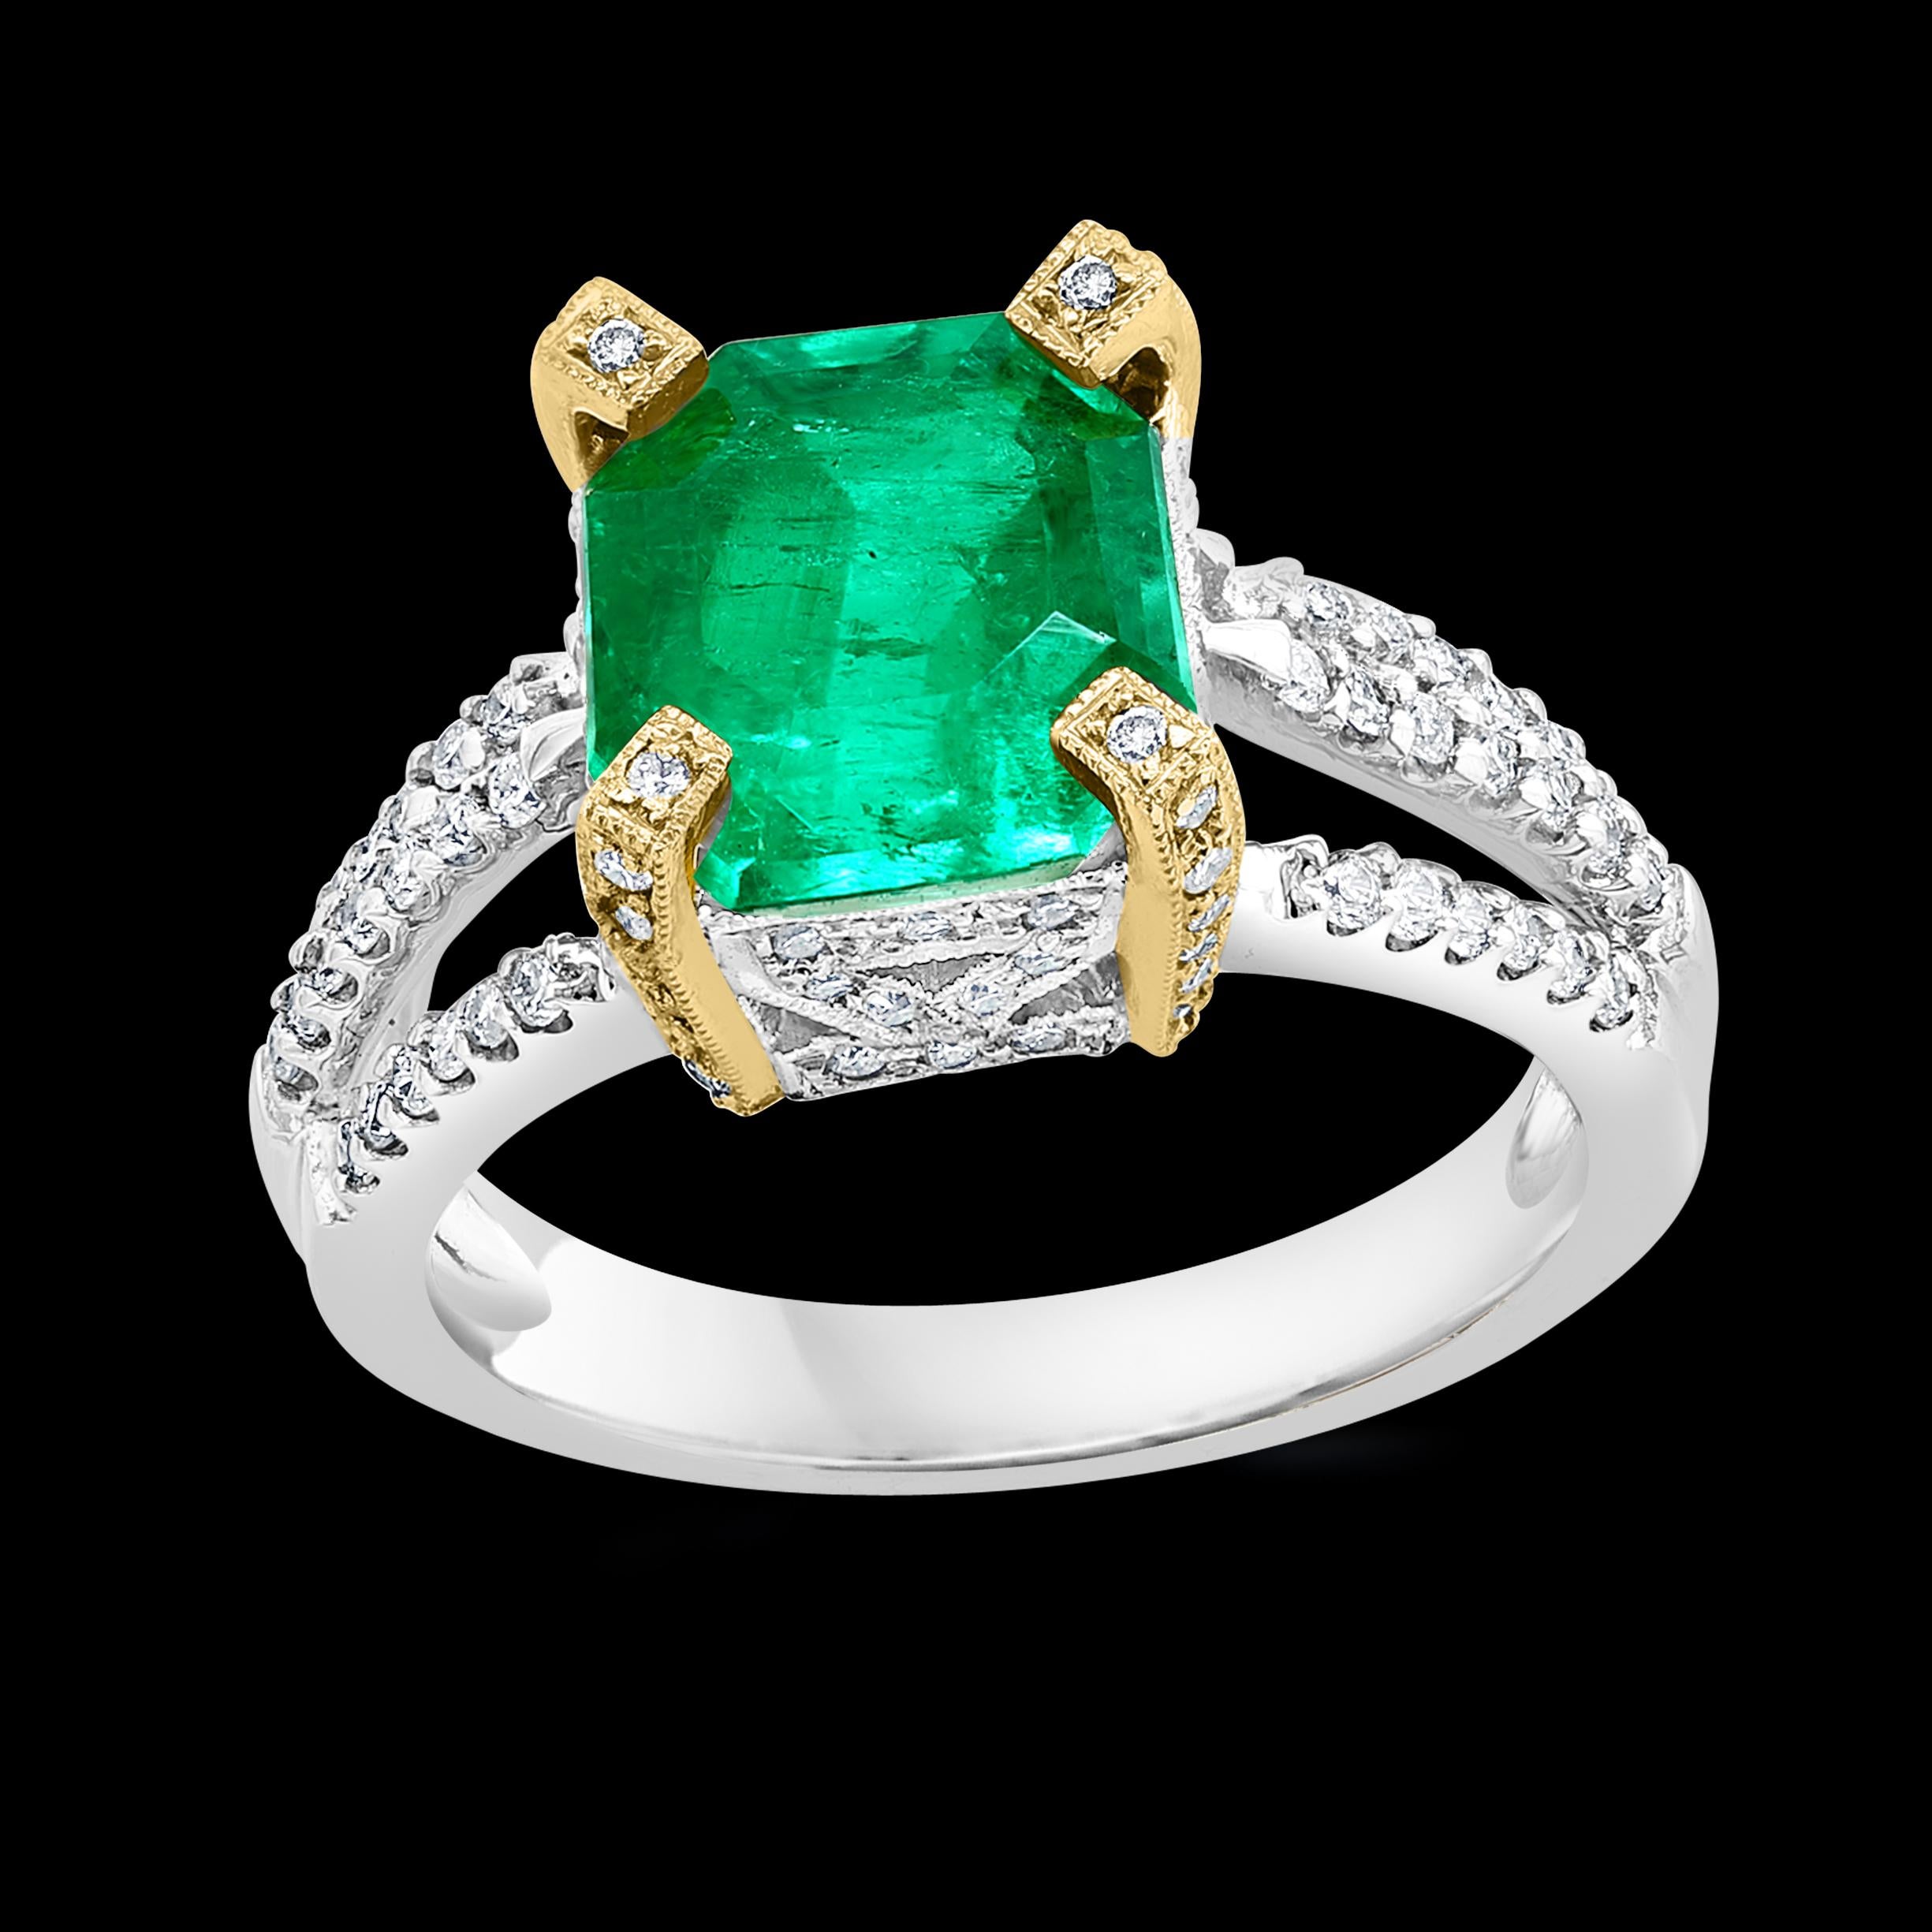 Extra Fine Colombian Emerald Ring
2.93 Carat Emerald  Cut Colombian Emerald & 0.52Ct Diamond Ring 18Karat White/Yellow Gold, Size 6.5
Extreme Fine quality of the Colombian Emerald
2,93 Carat exact weight   Colombian Emerald Absolutely gorgeous